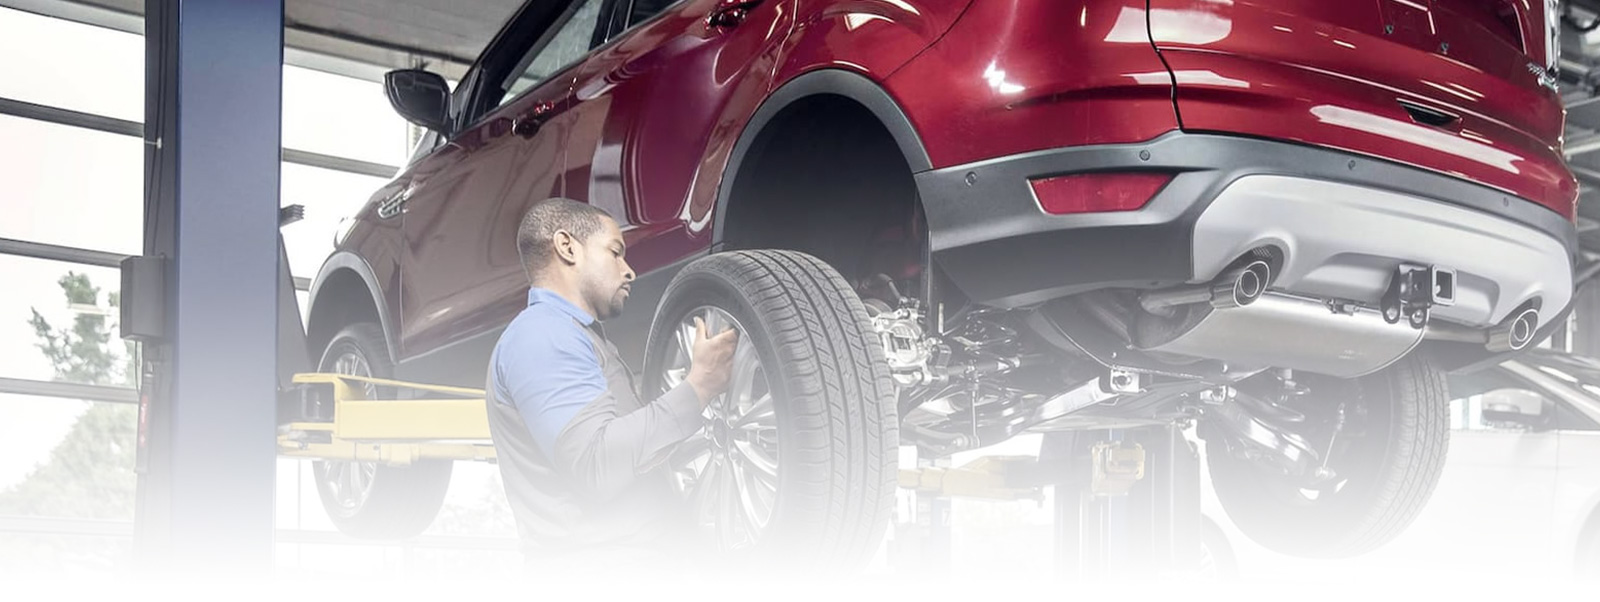 Action Muffler & Brake Service offers a wide range of services to Memphis, TN and surrounding areas.